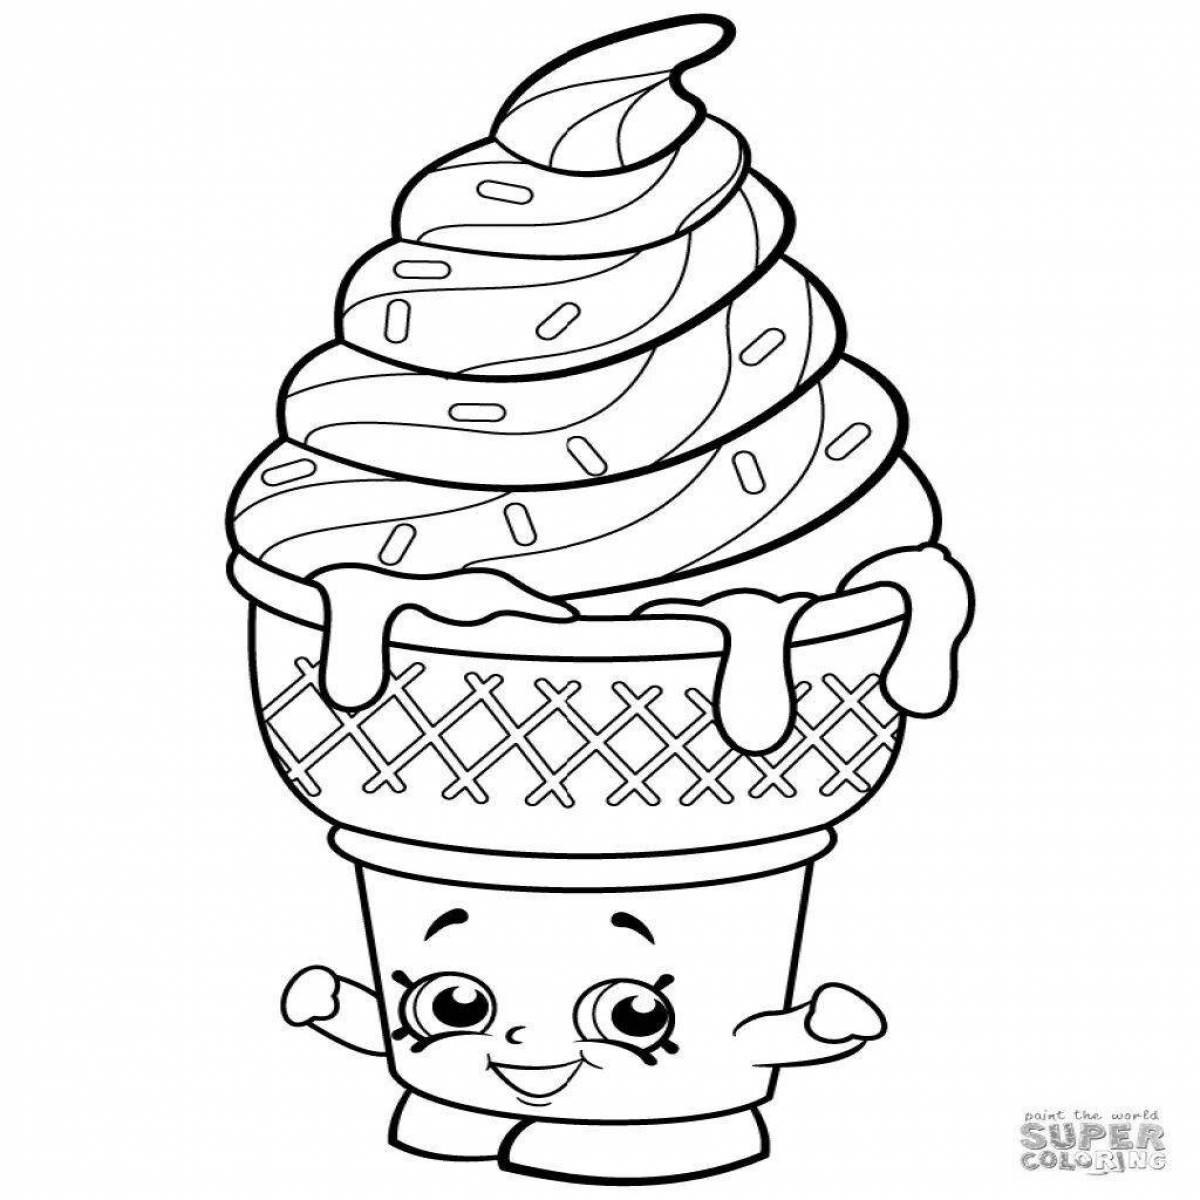 Tempting donuts coloring page